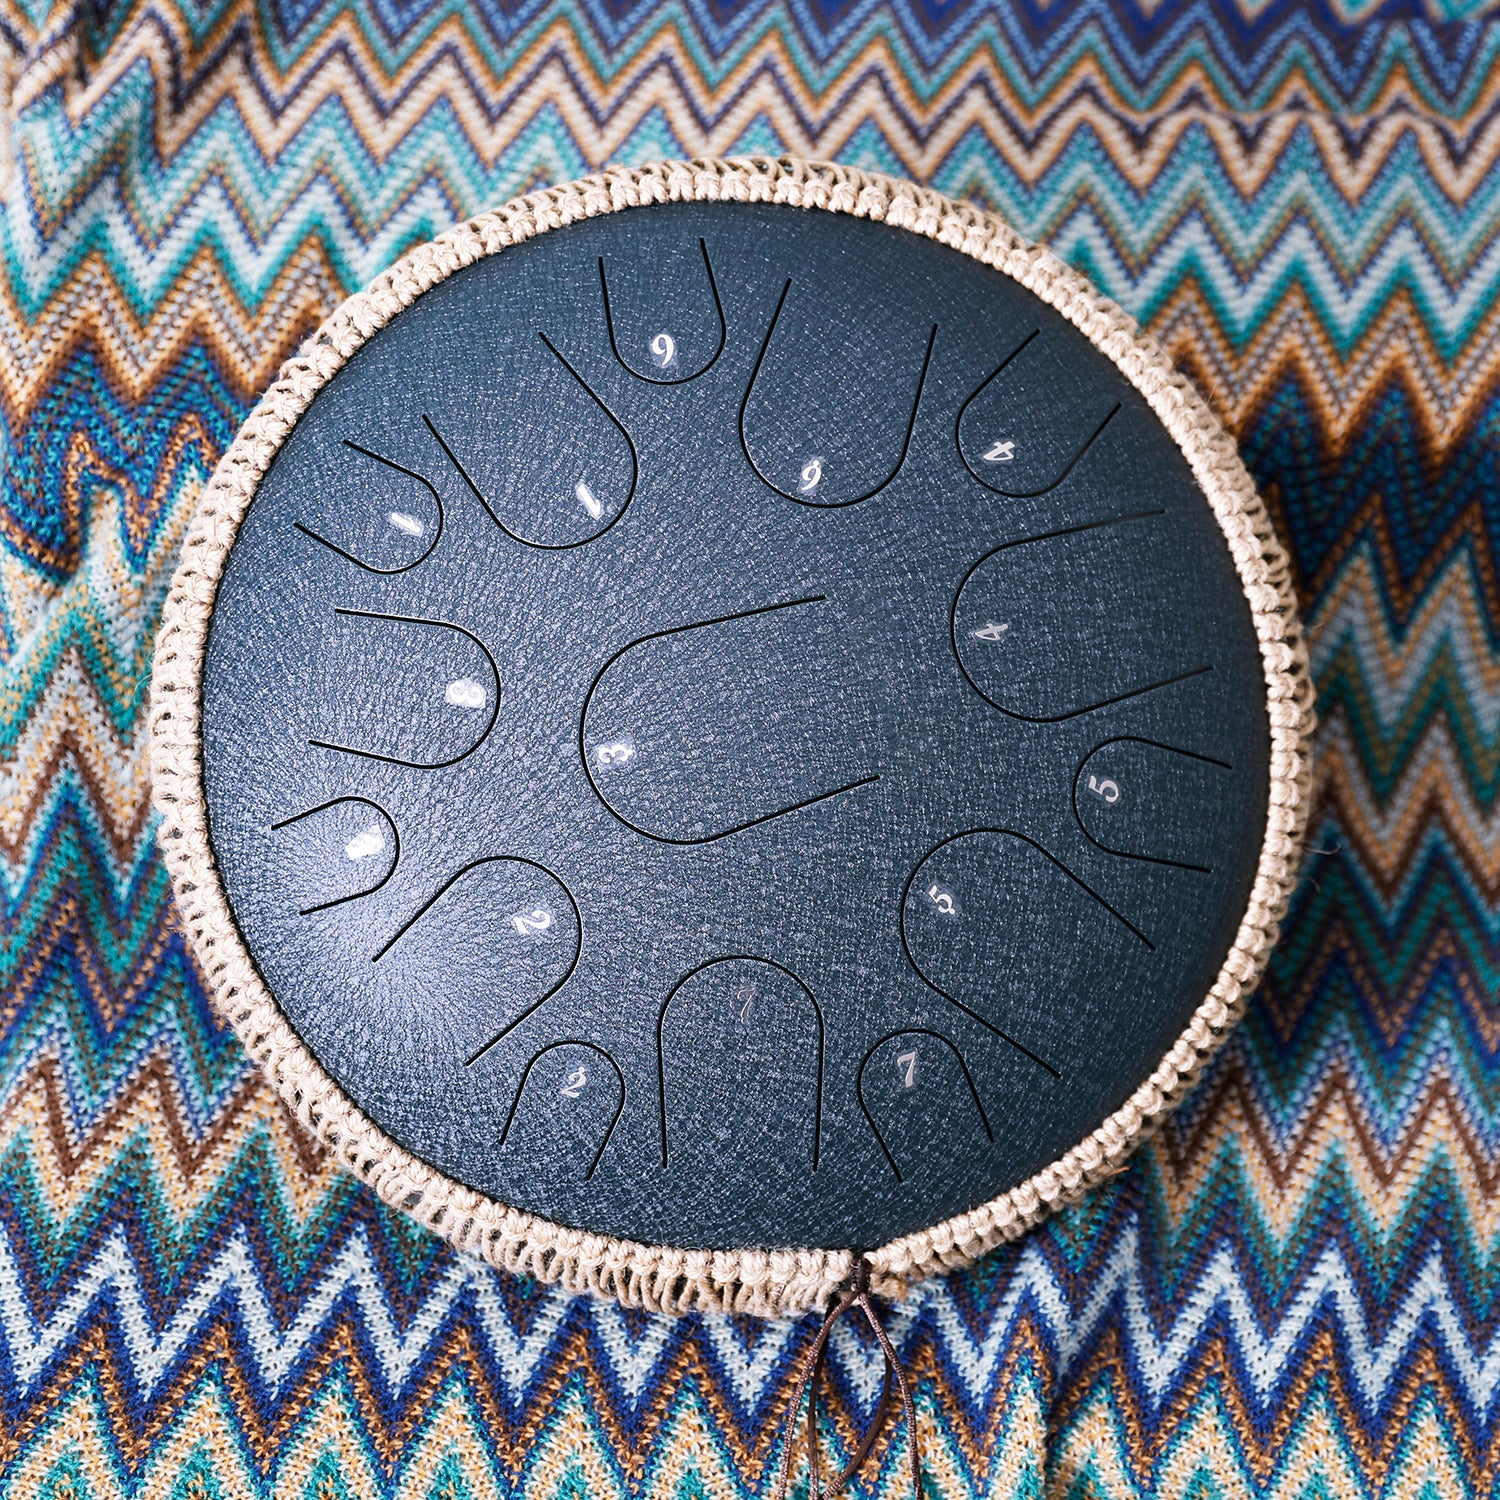 BeatRise 13 Inch 15 Notes Steel Tongue Drum in Key D Major (Navy Blue)